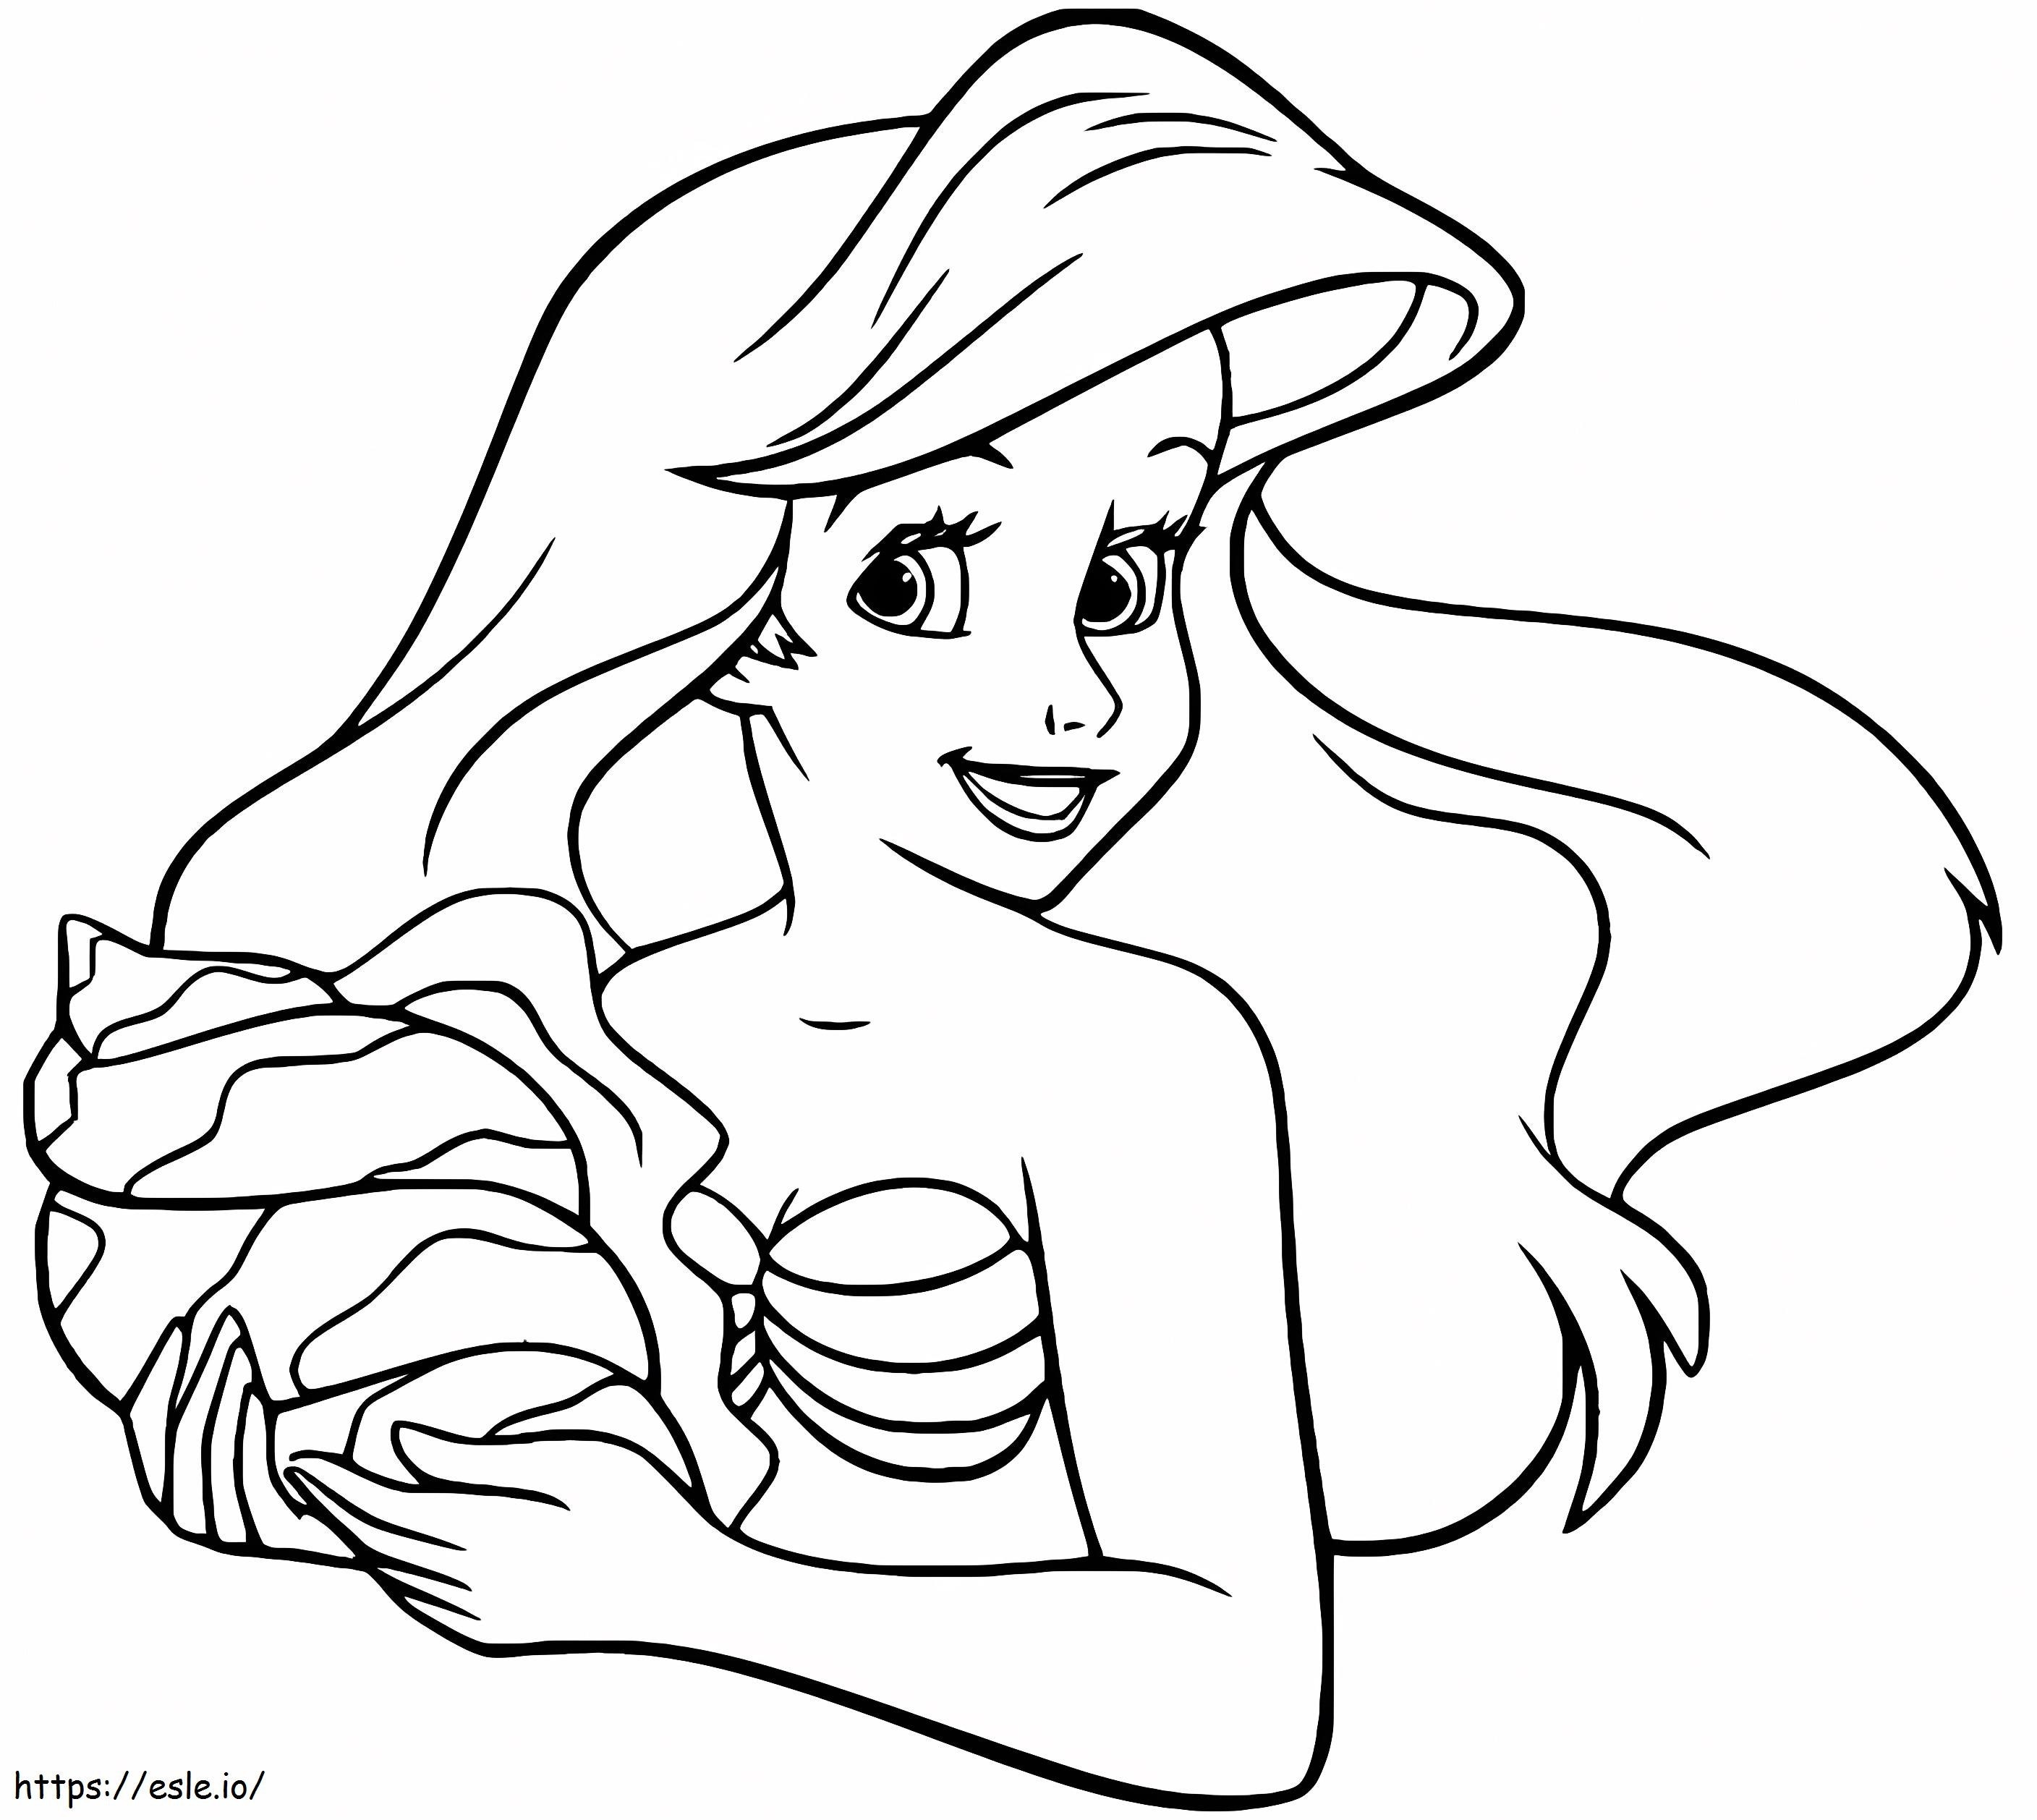 Funny Ariel Holds A Shell coloring page